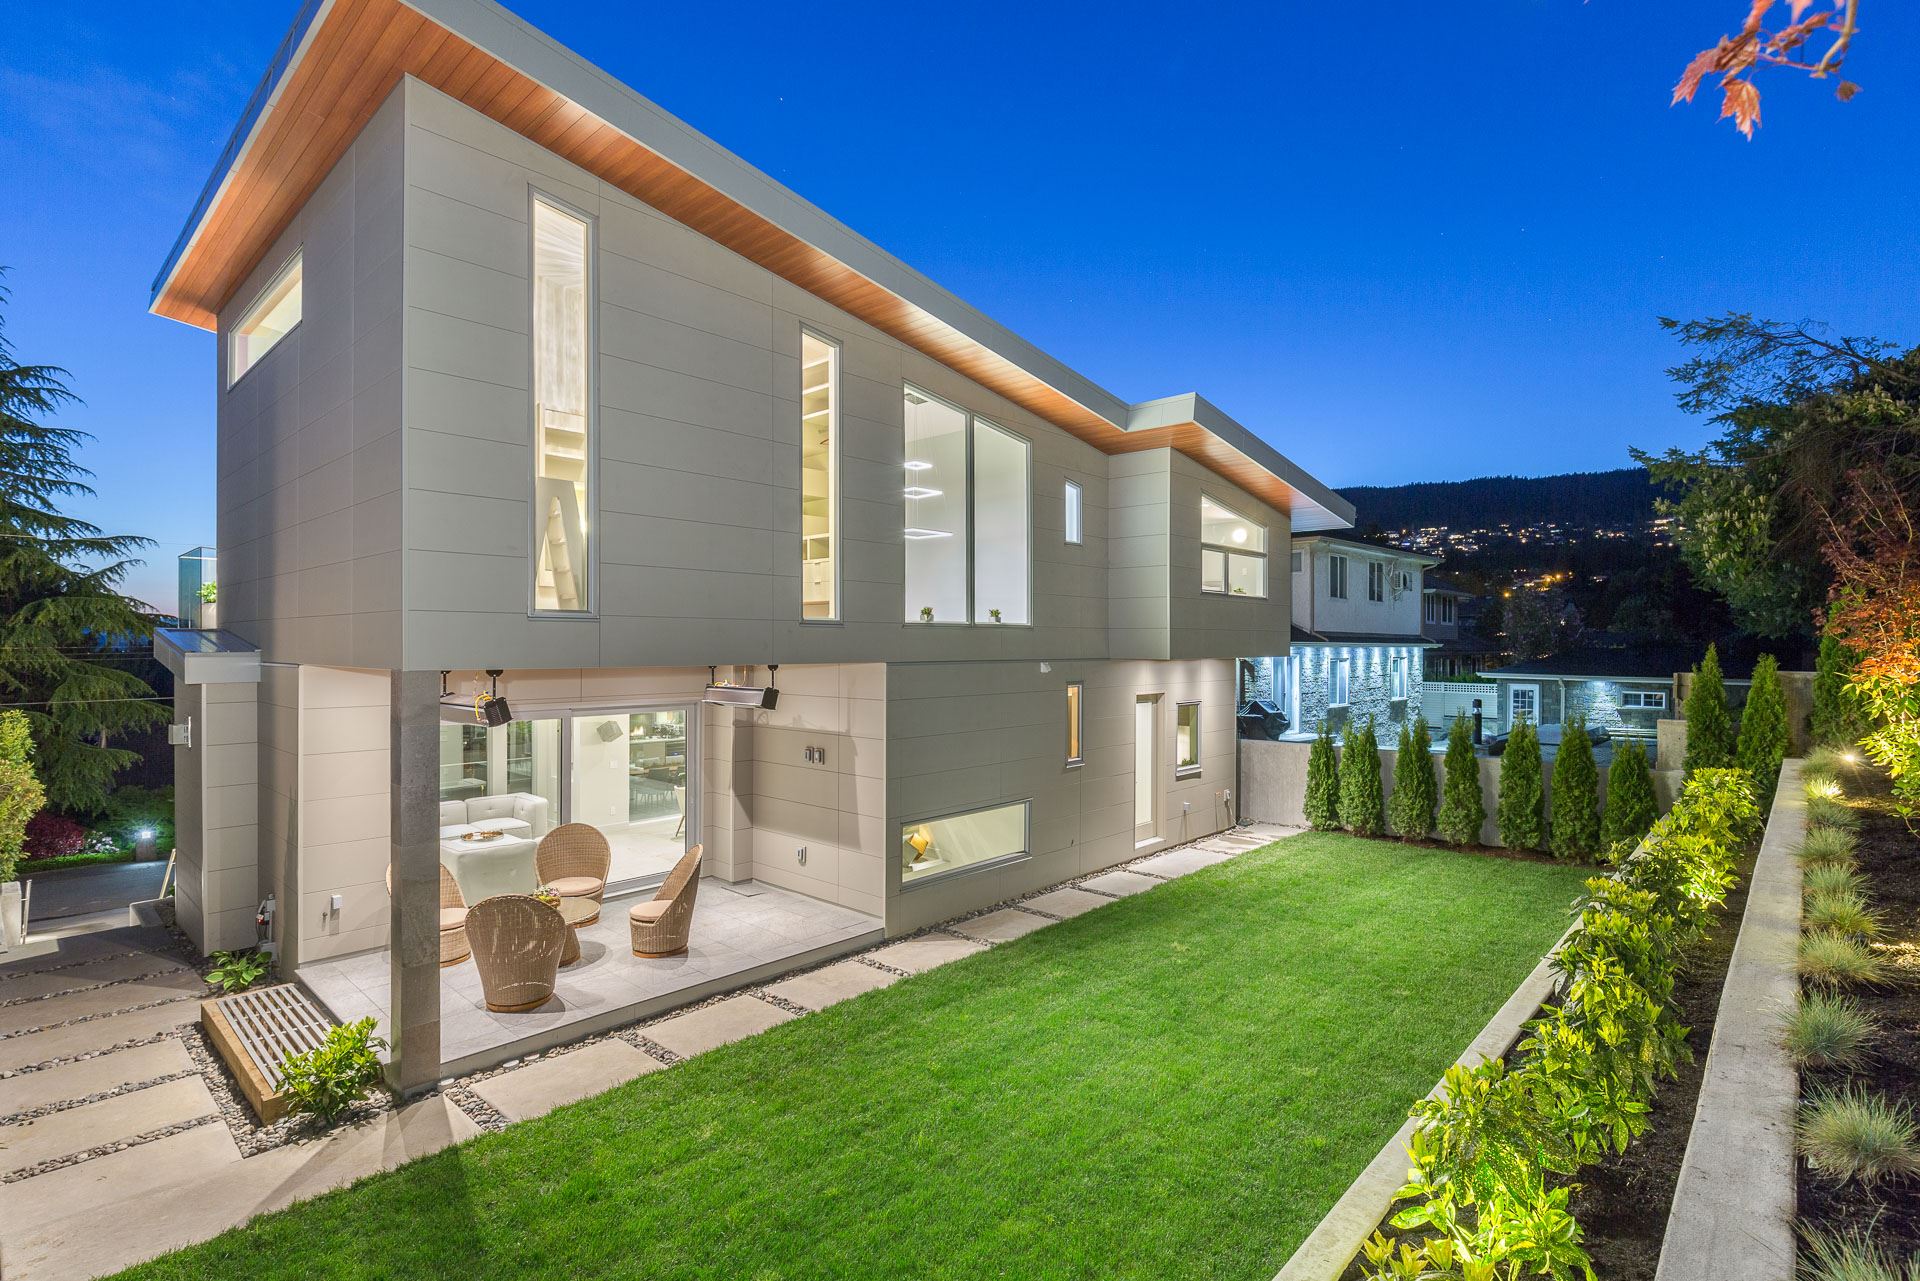 Modern home with bright interior lights and beautiful, green grass and outdoor seating area featuring Nichiha’s ArchBlock panels in gray